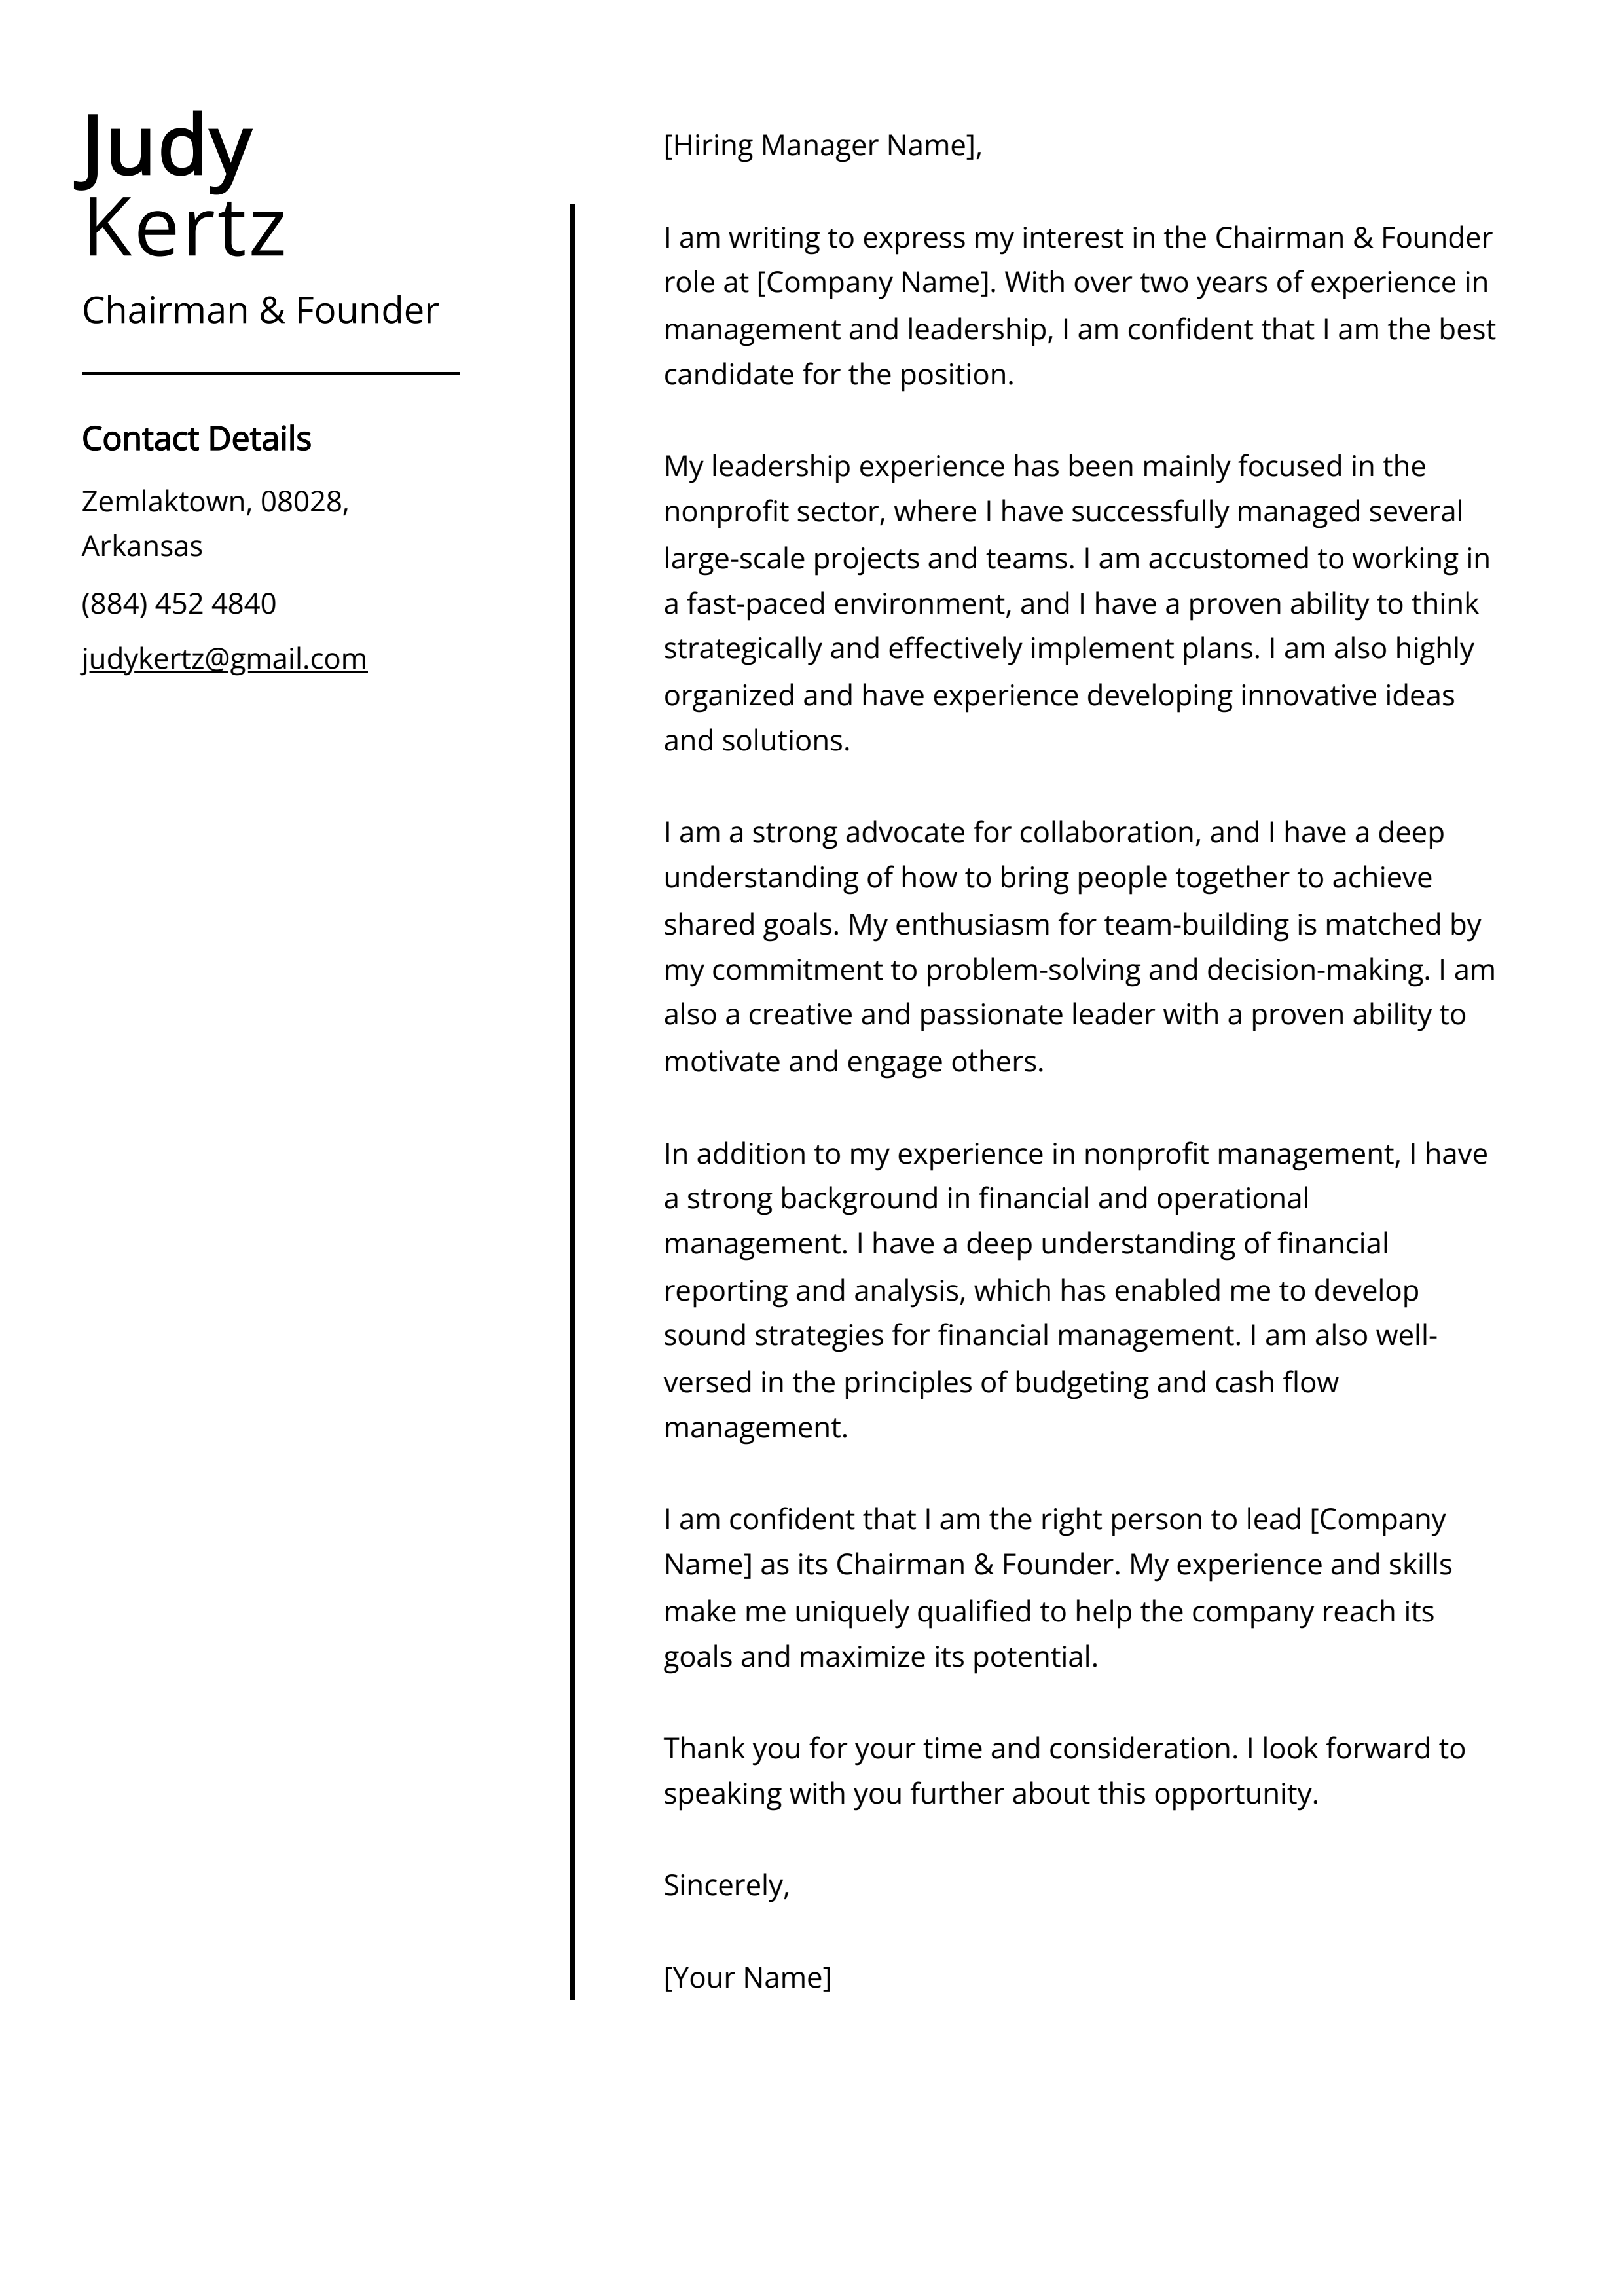 Chairman and Founder Cover Letter Example